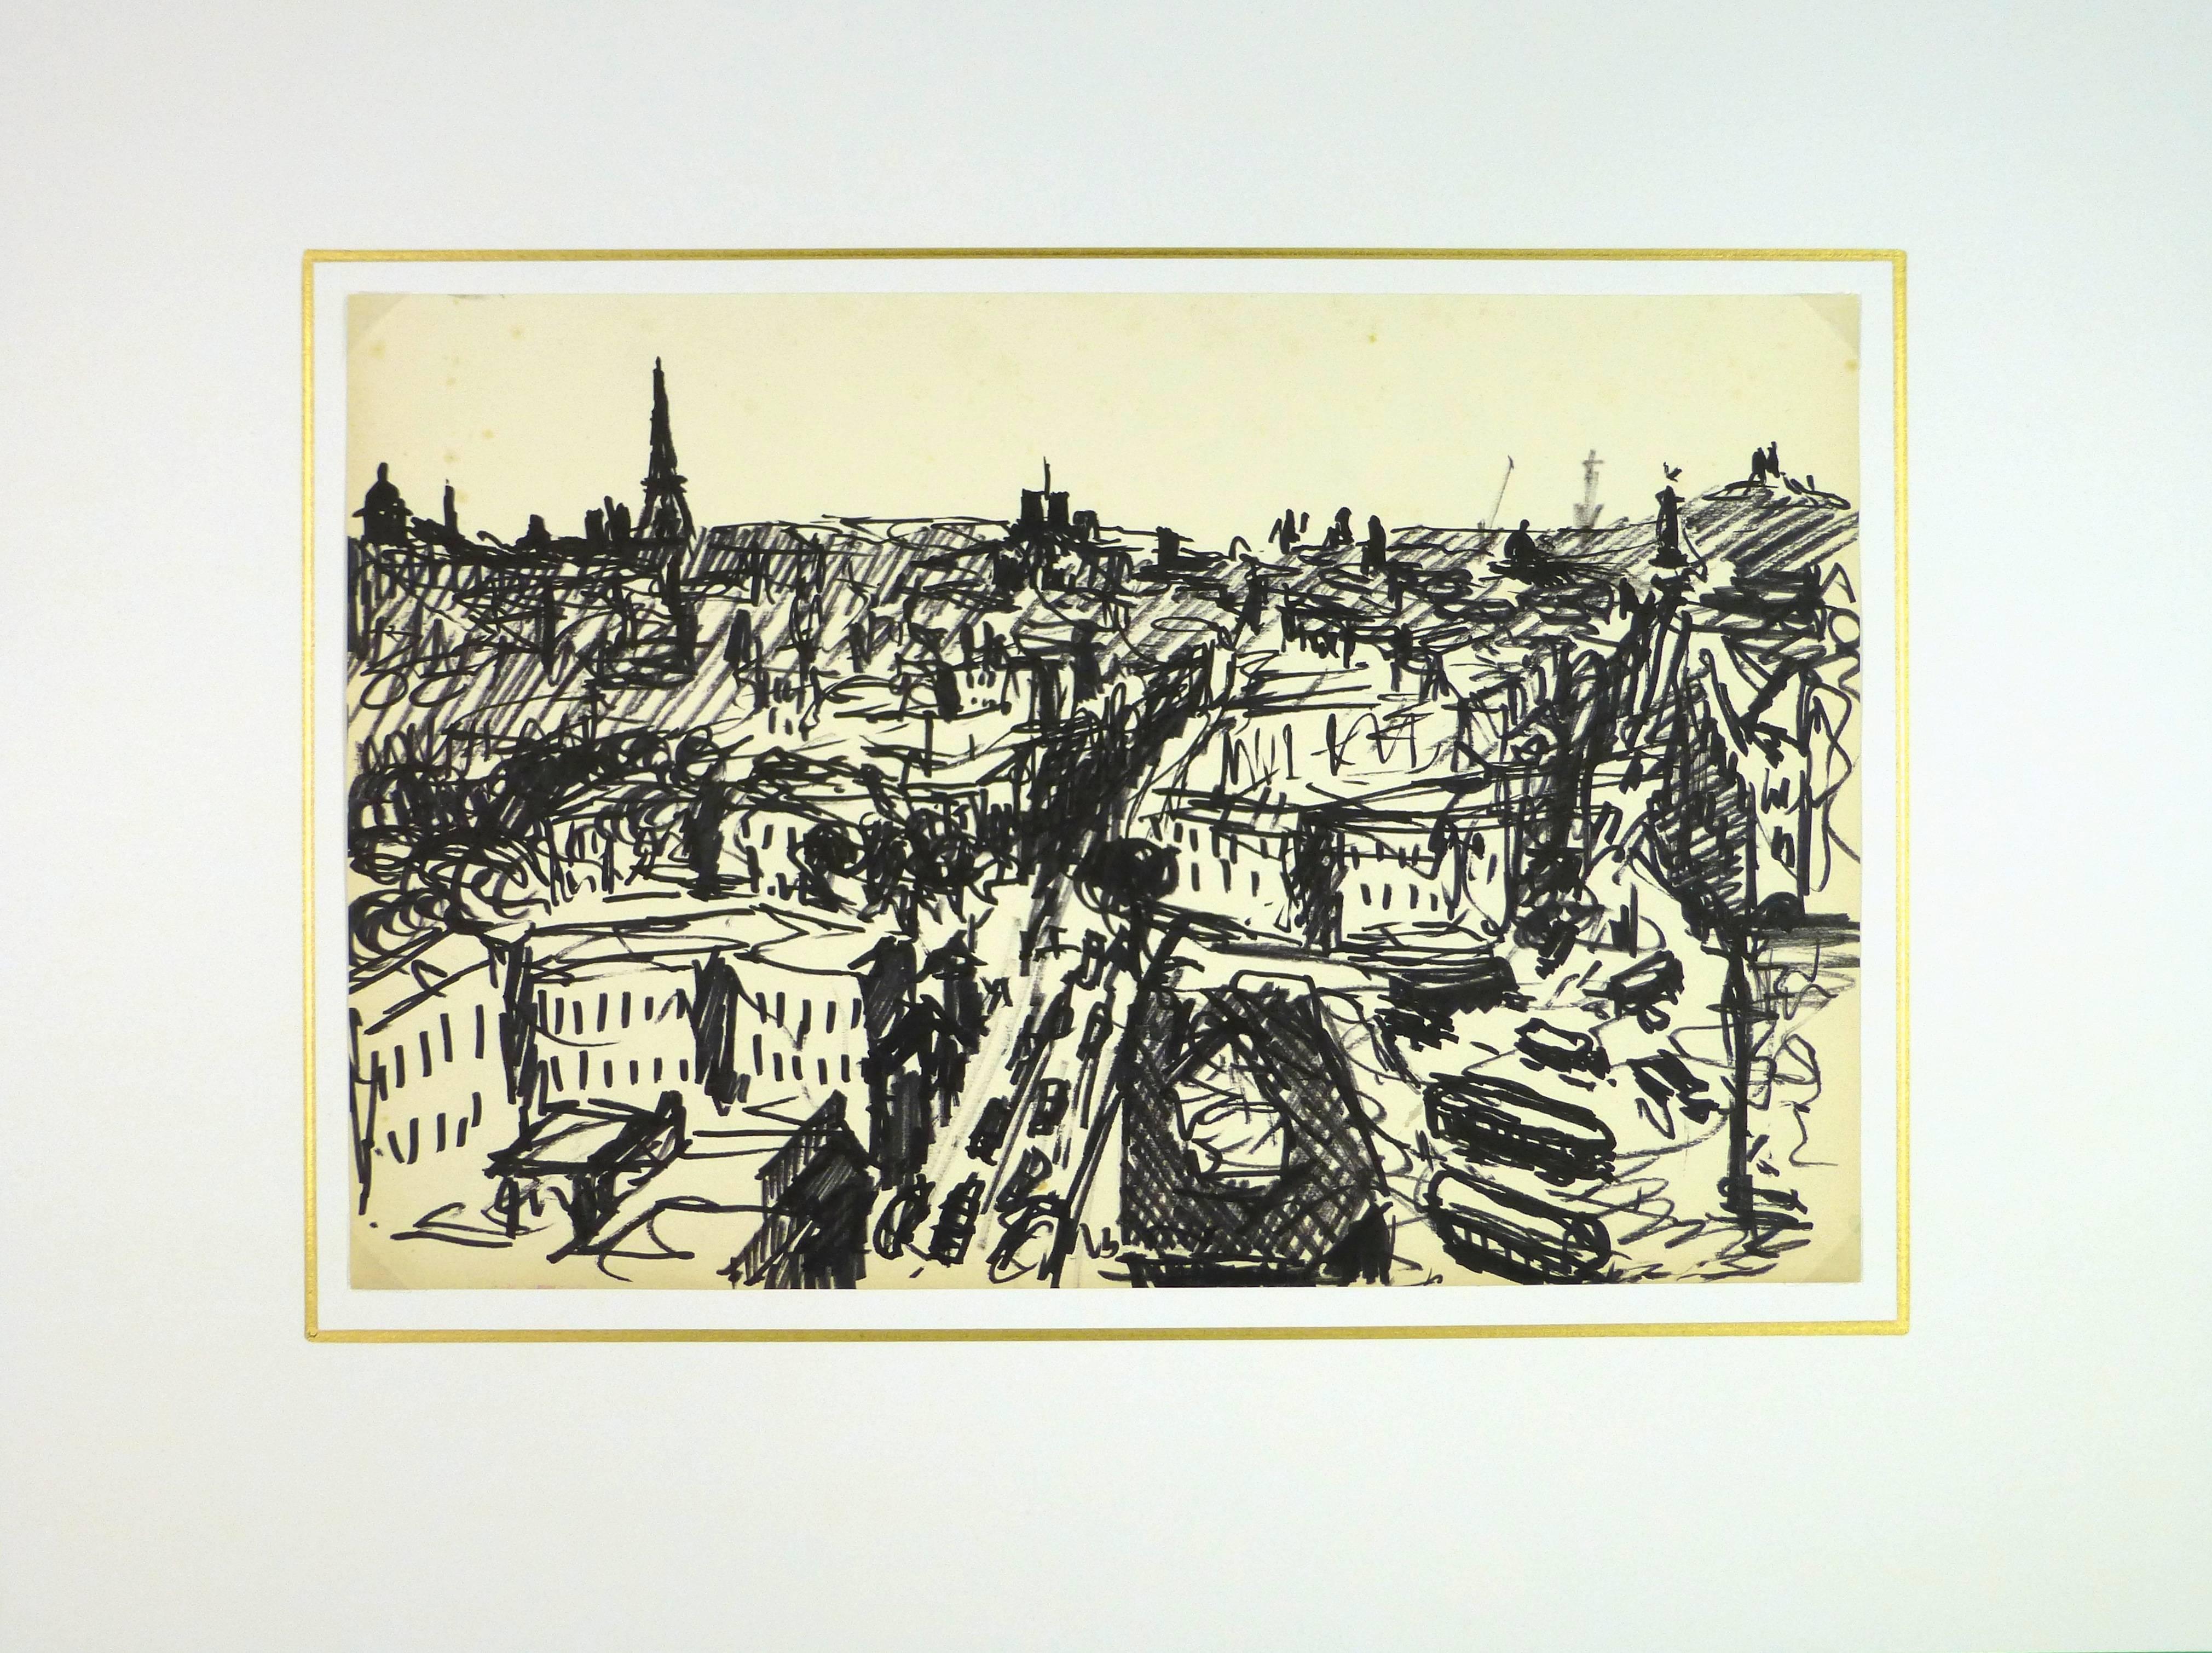 French black and white line drawing of Paris skyline showing the Eiffel Tower in the distance.

Original artwork on paper displayed on a white mat with a gold border. Mat fits a standard-sized frame. Archival plastic sleeve and Certificate of